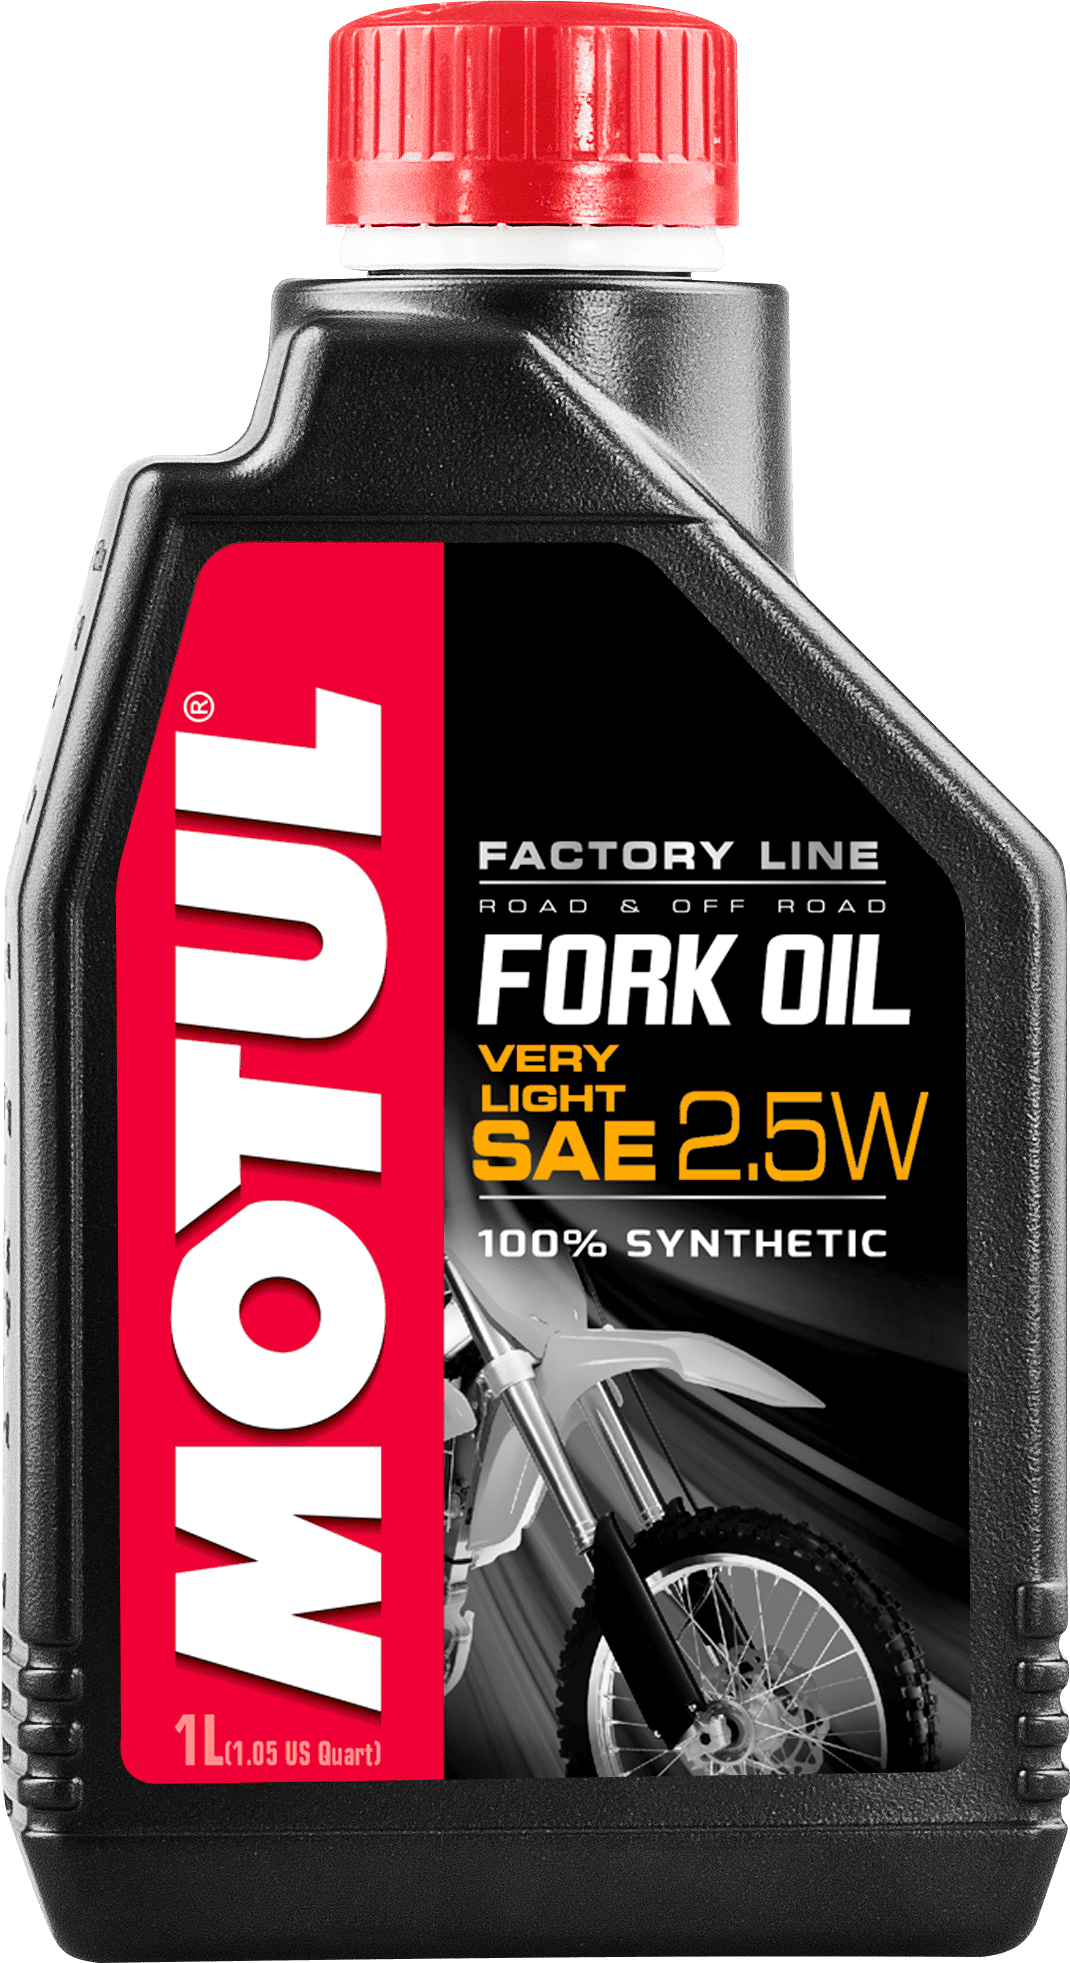 105962-1 100% synthetic high performance hydraulic fluid for racing telescopic Forks.